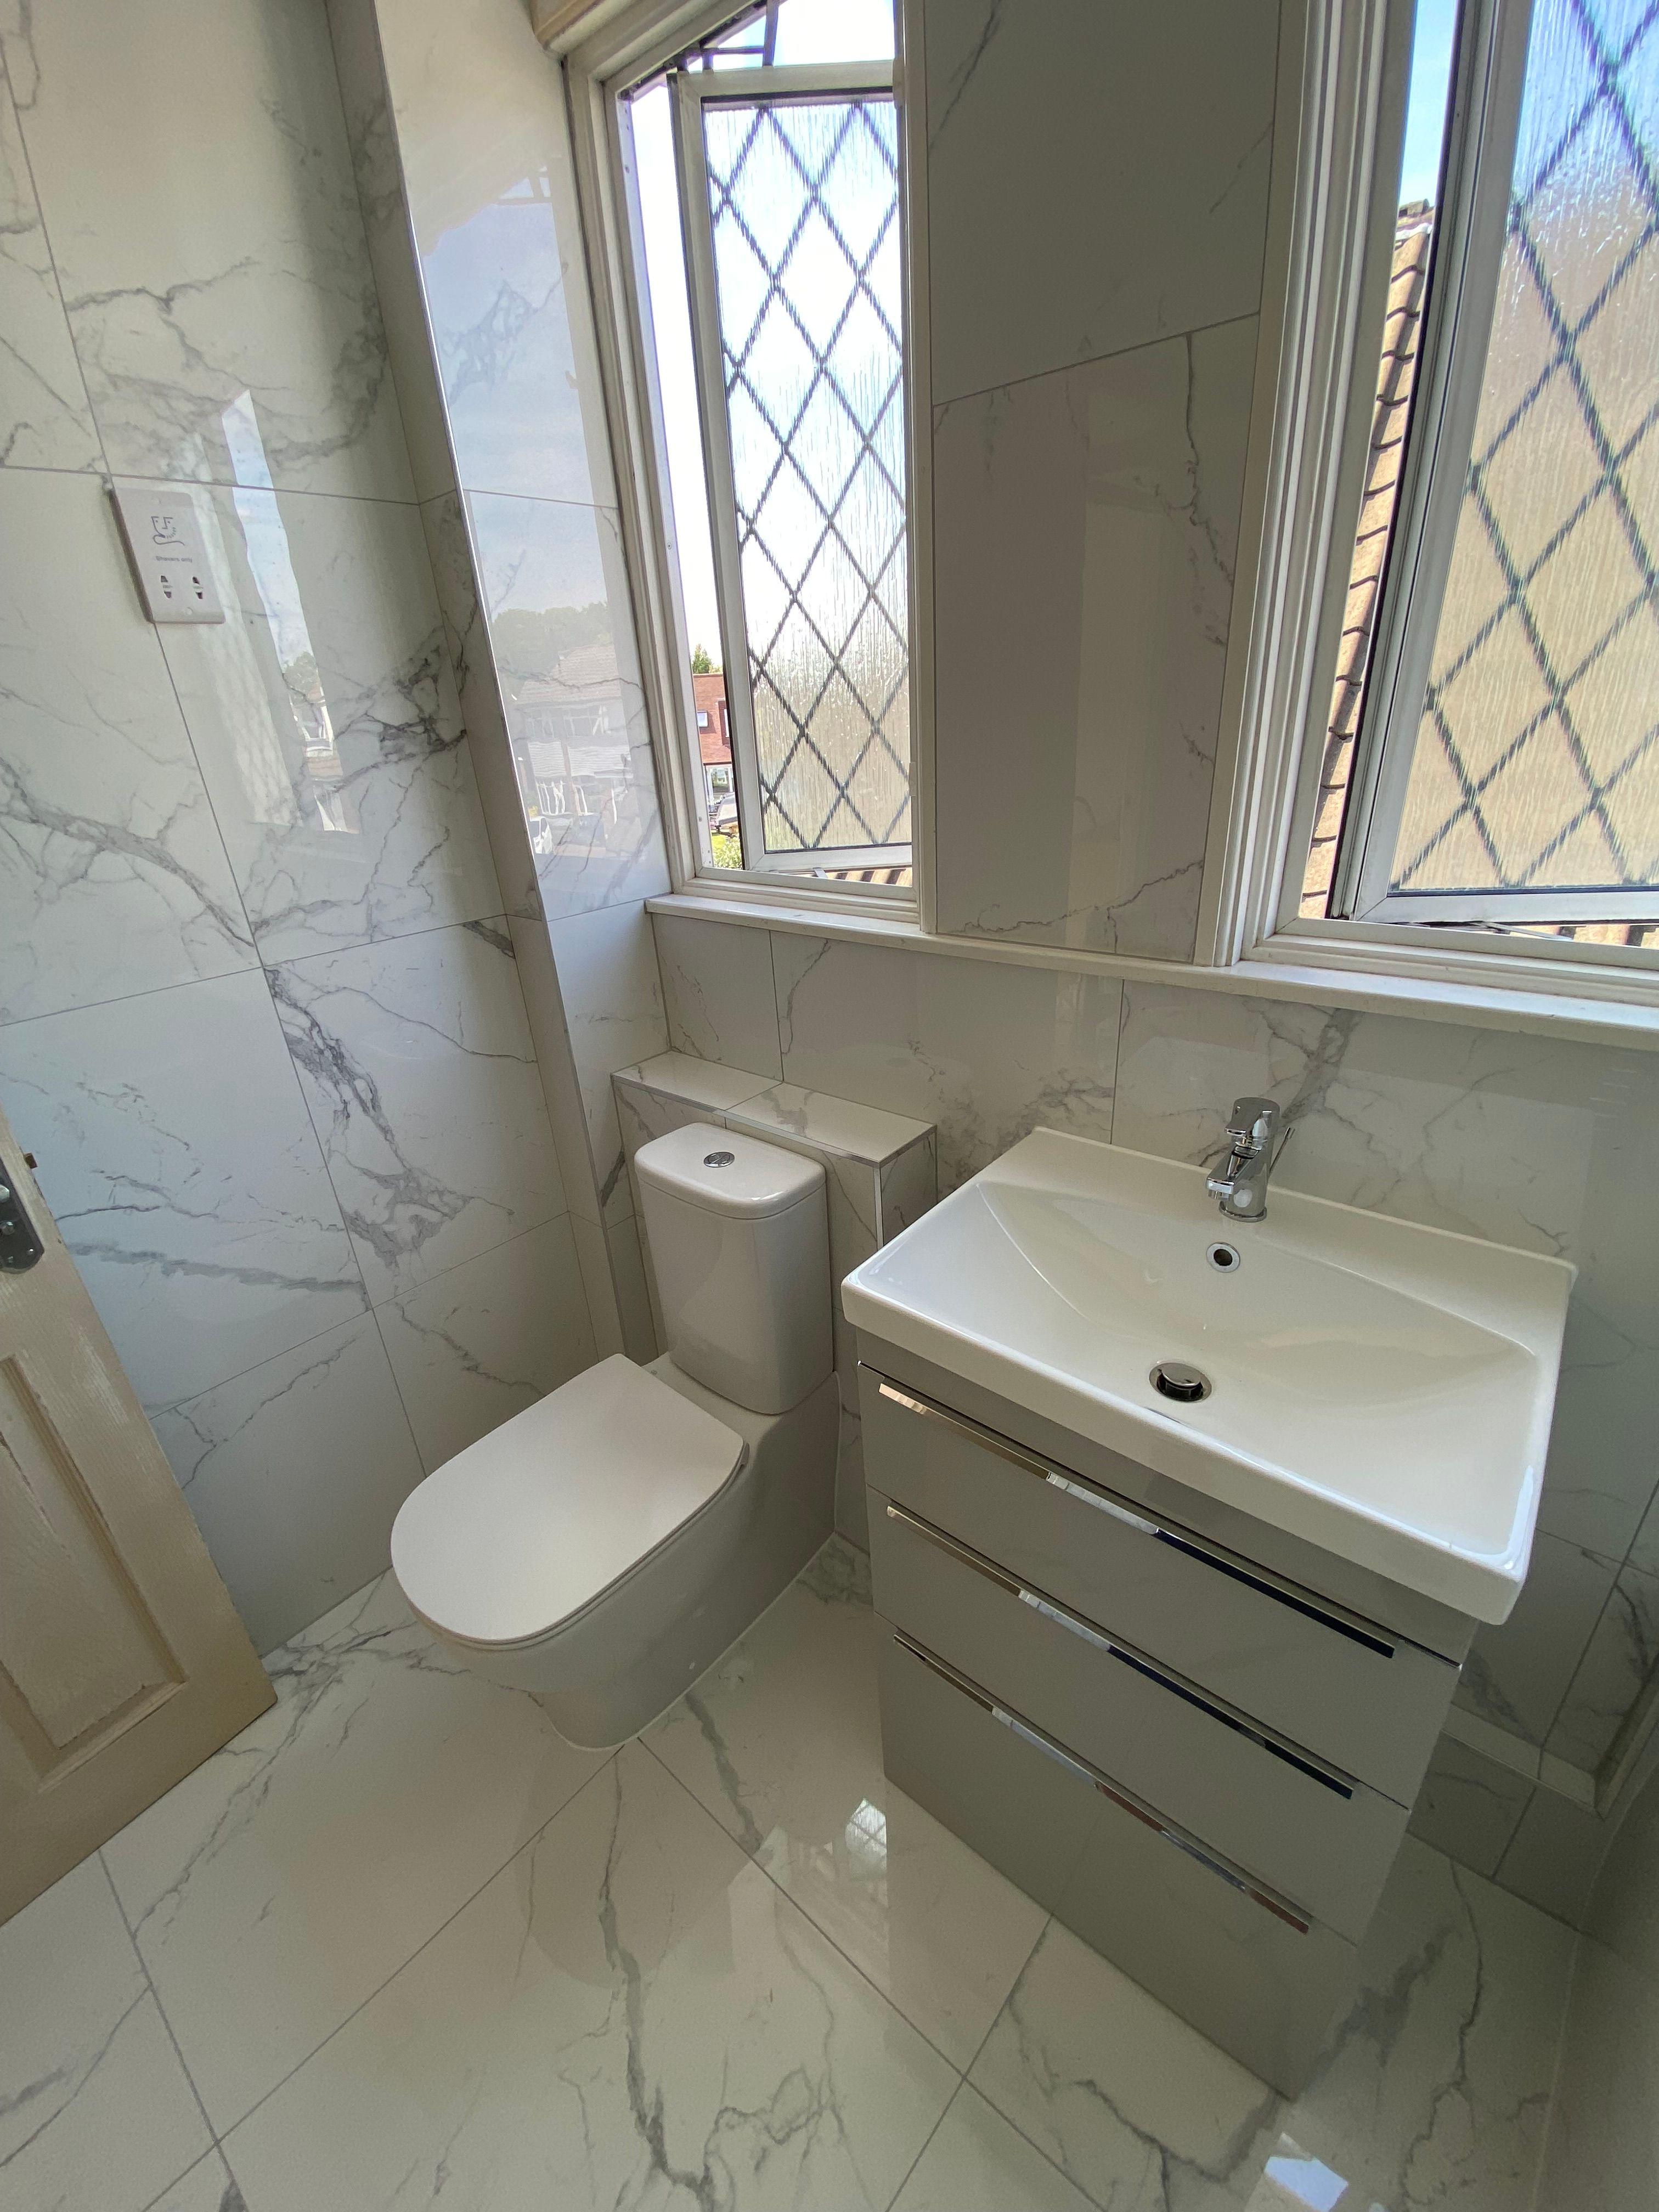 Bathroom fitted by LH Plumbing & Heating.